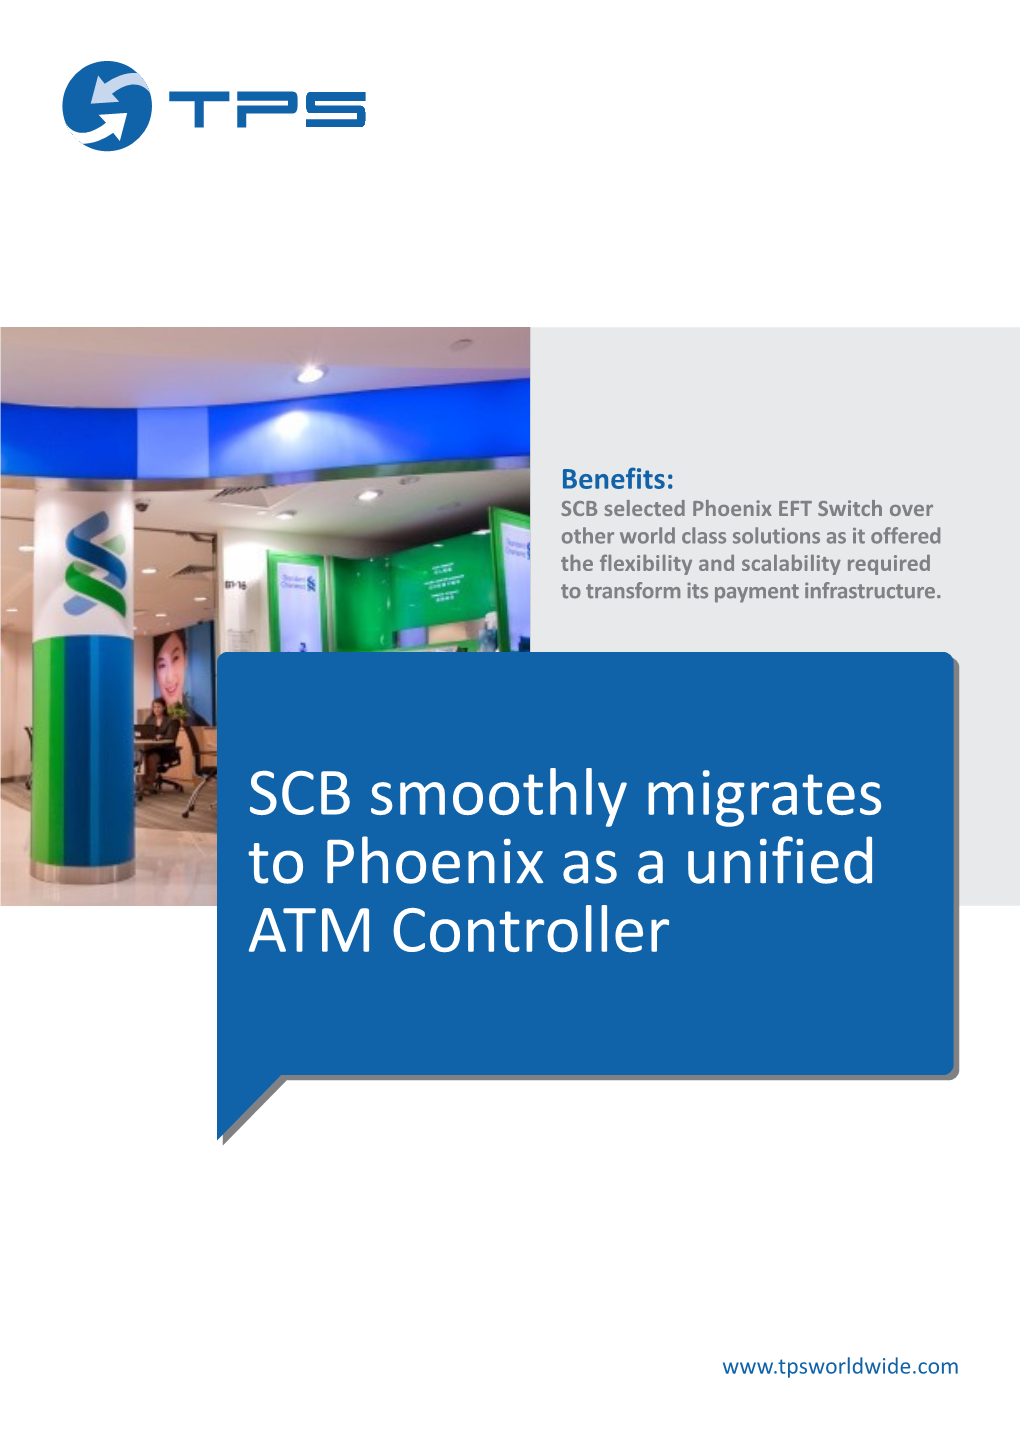 SCB Smoothly Migrates to Phoenix As a Unified ATM Controller